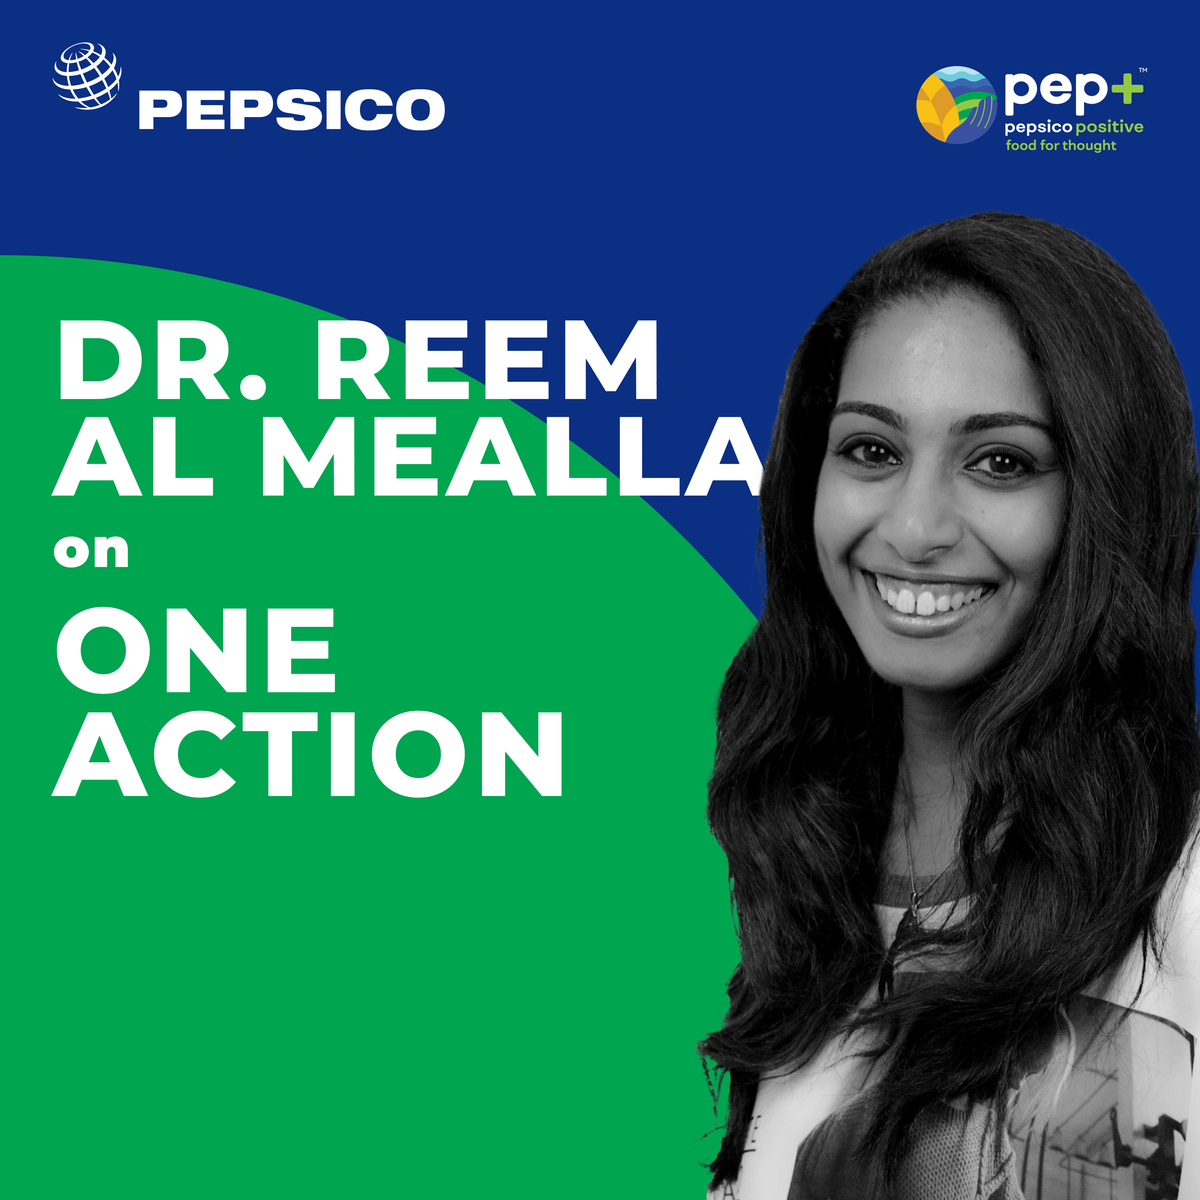 Why oceans are critical for food security, with Dr. Reem Al Mealla